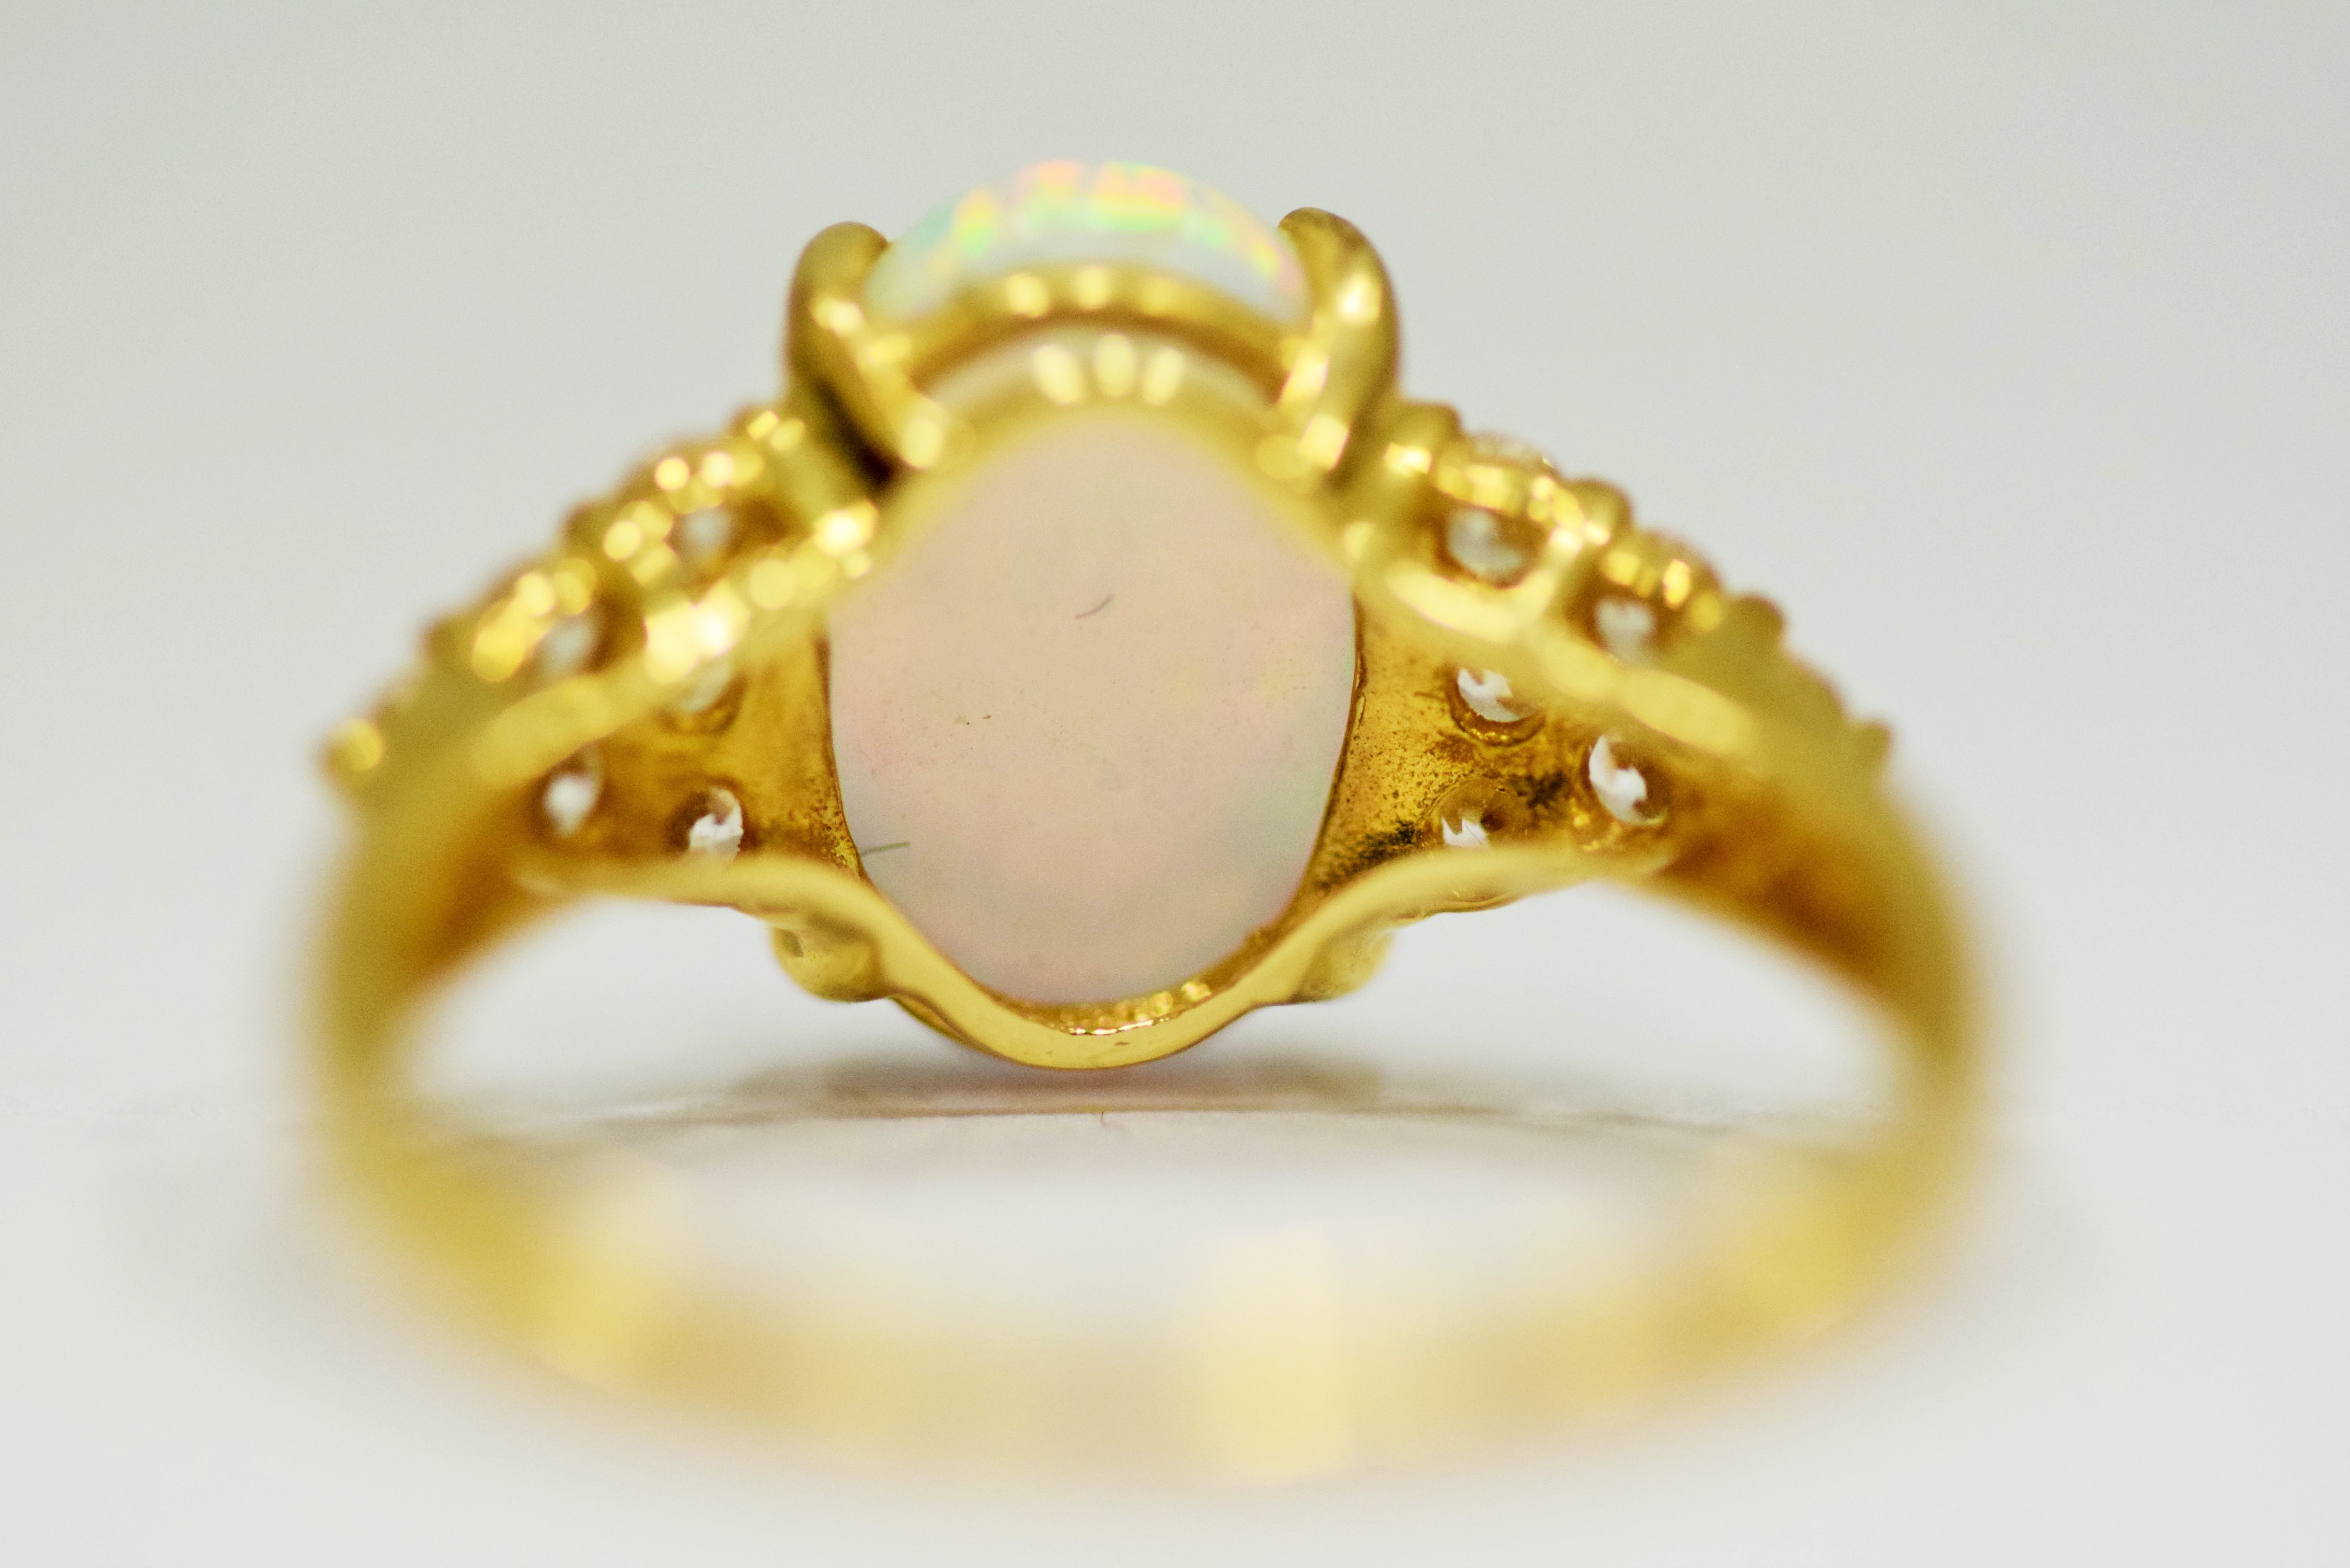 14ct Yellow Gold Ring set with a large central Opal which measures 12 x 8mm with 12 clear gemstones  - Image 4 of 4